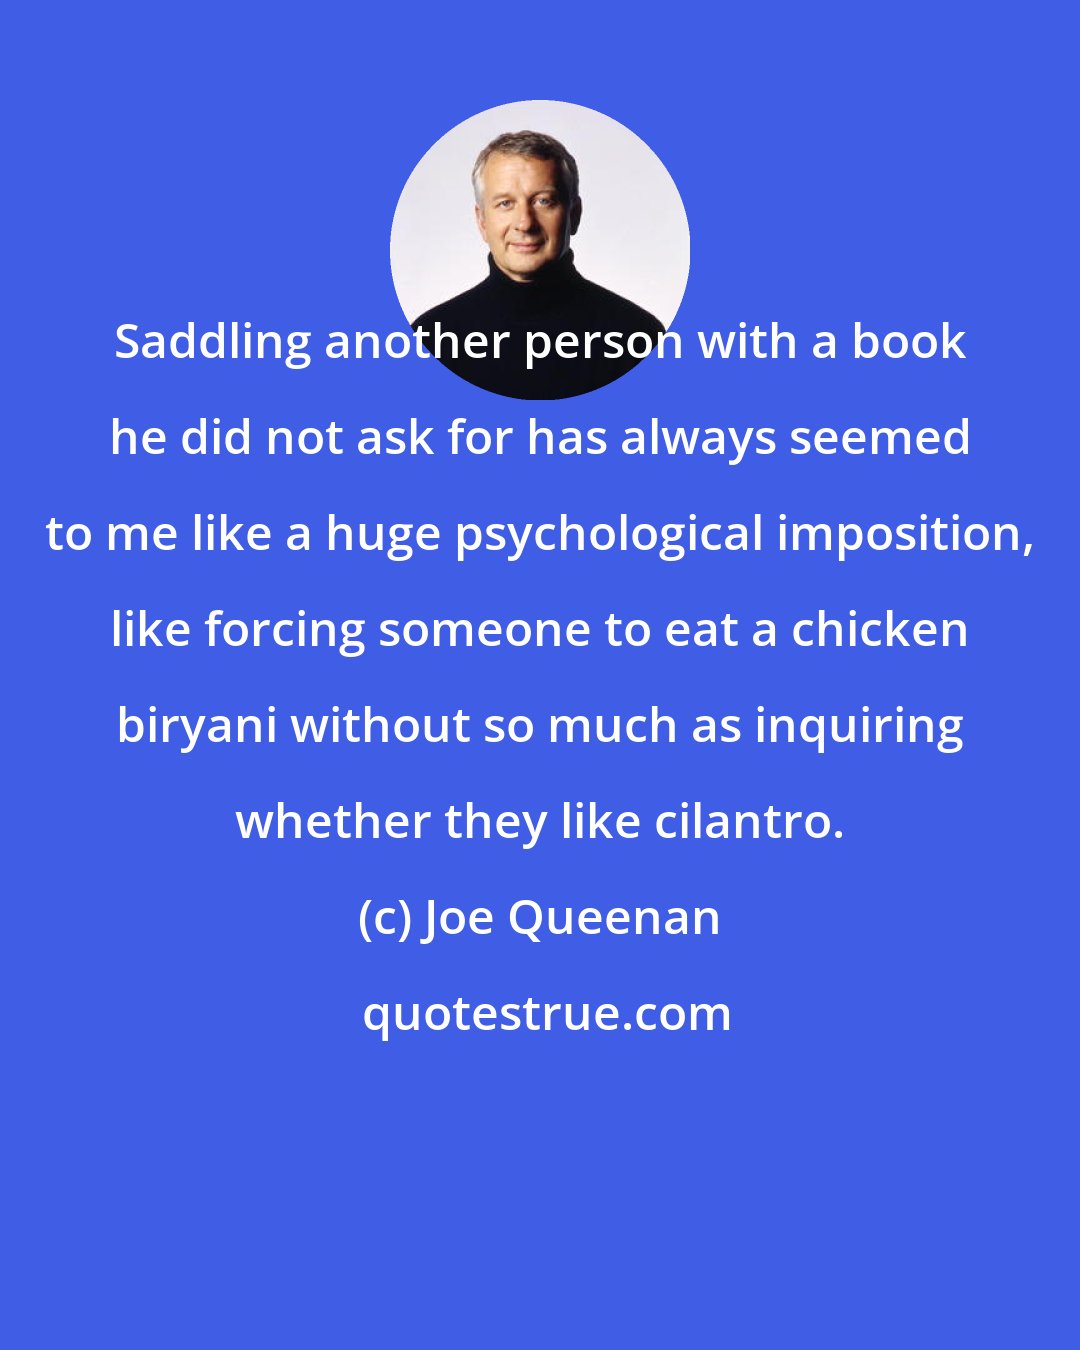 Joe Queenan: Saddling another person with a book he did not ask for has always seemed to me like a huge psychological imposition, like forcing someone to eat a chicken biryani without so much as inquiring whether they like cilantro.